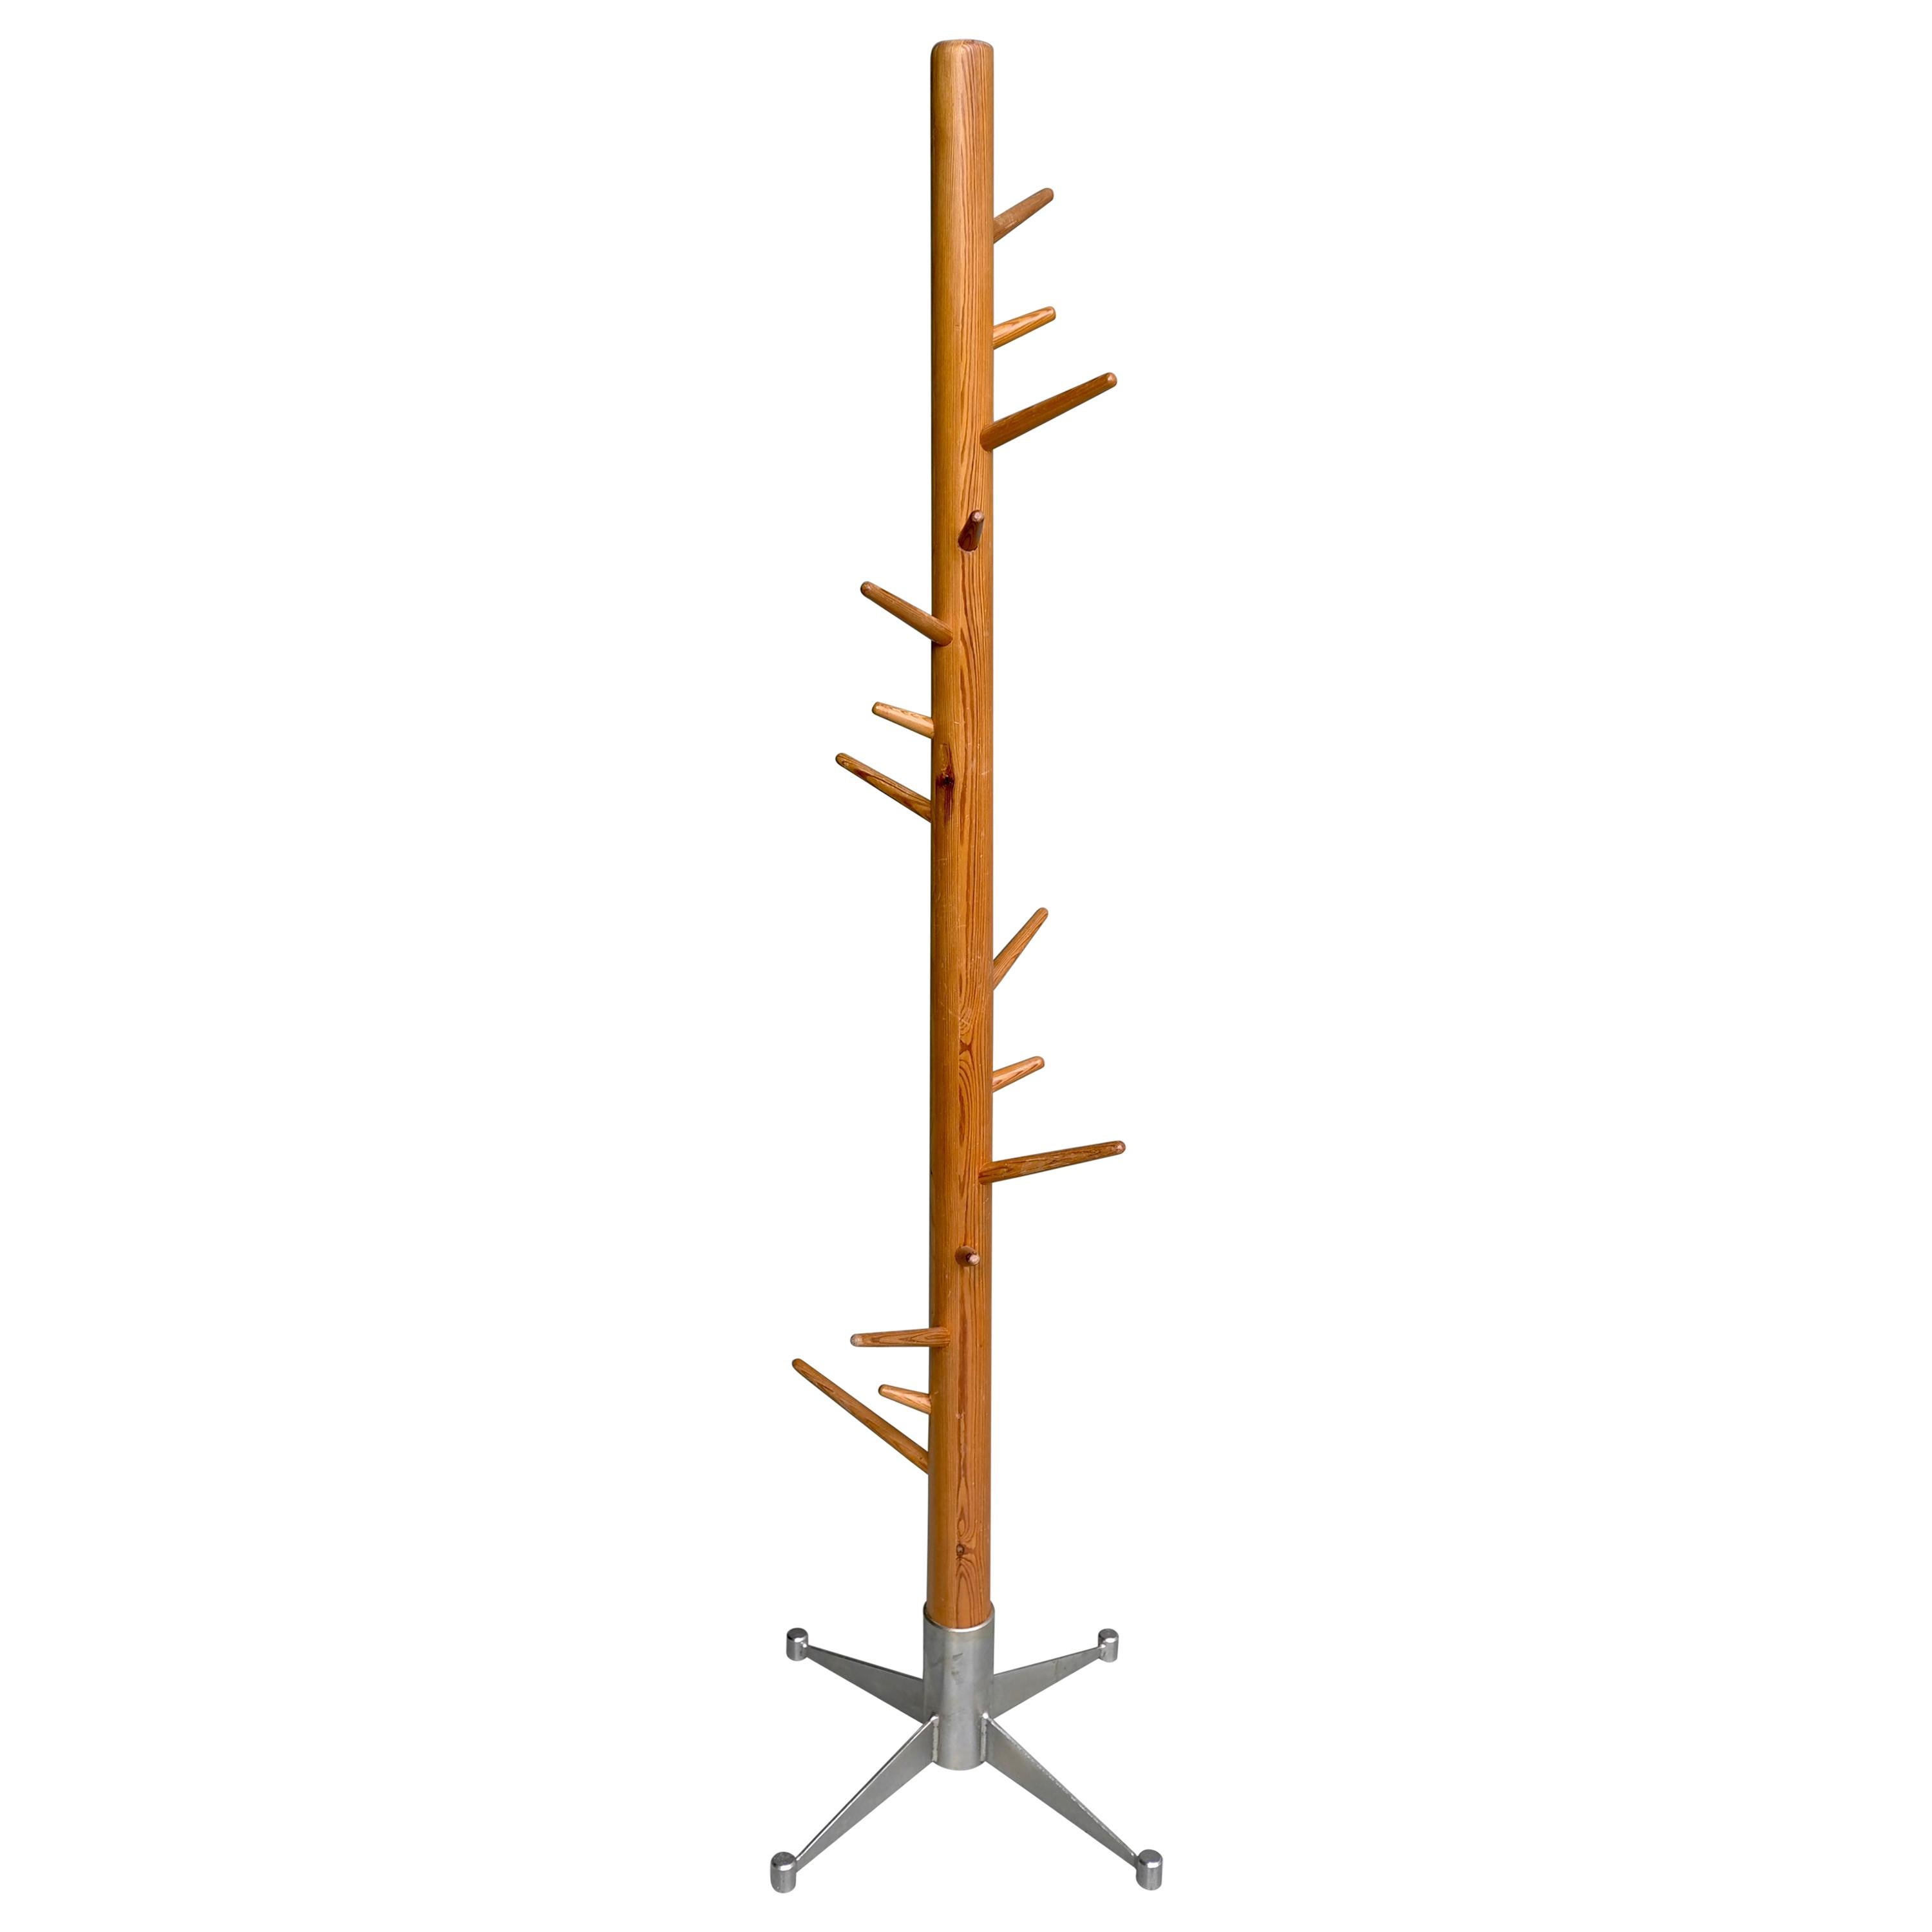 Large Organic Midcentury Coat Stand in Solid Pine with Metal Base, Sweden, 1960